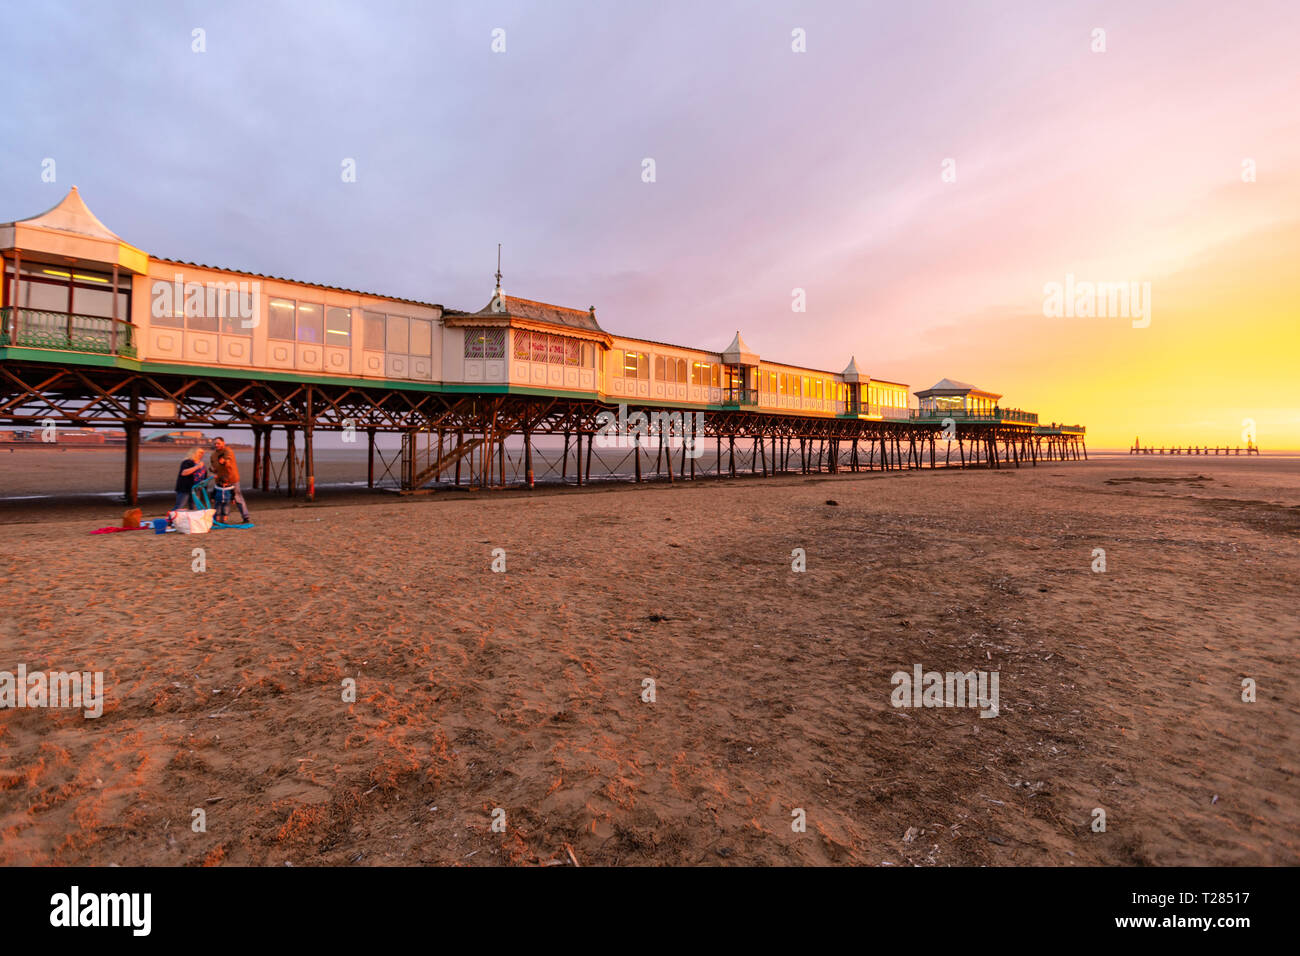 St Anne's Pier, a Victorian pier, at sunset in the English seaside resort of St Anne's-on-the-Sea, Lytham St Annes, Lancashire, UK Stock Photo